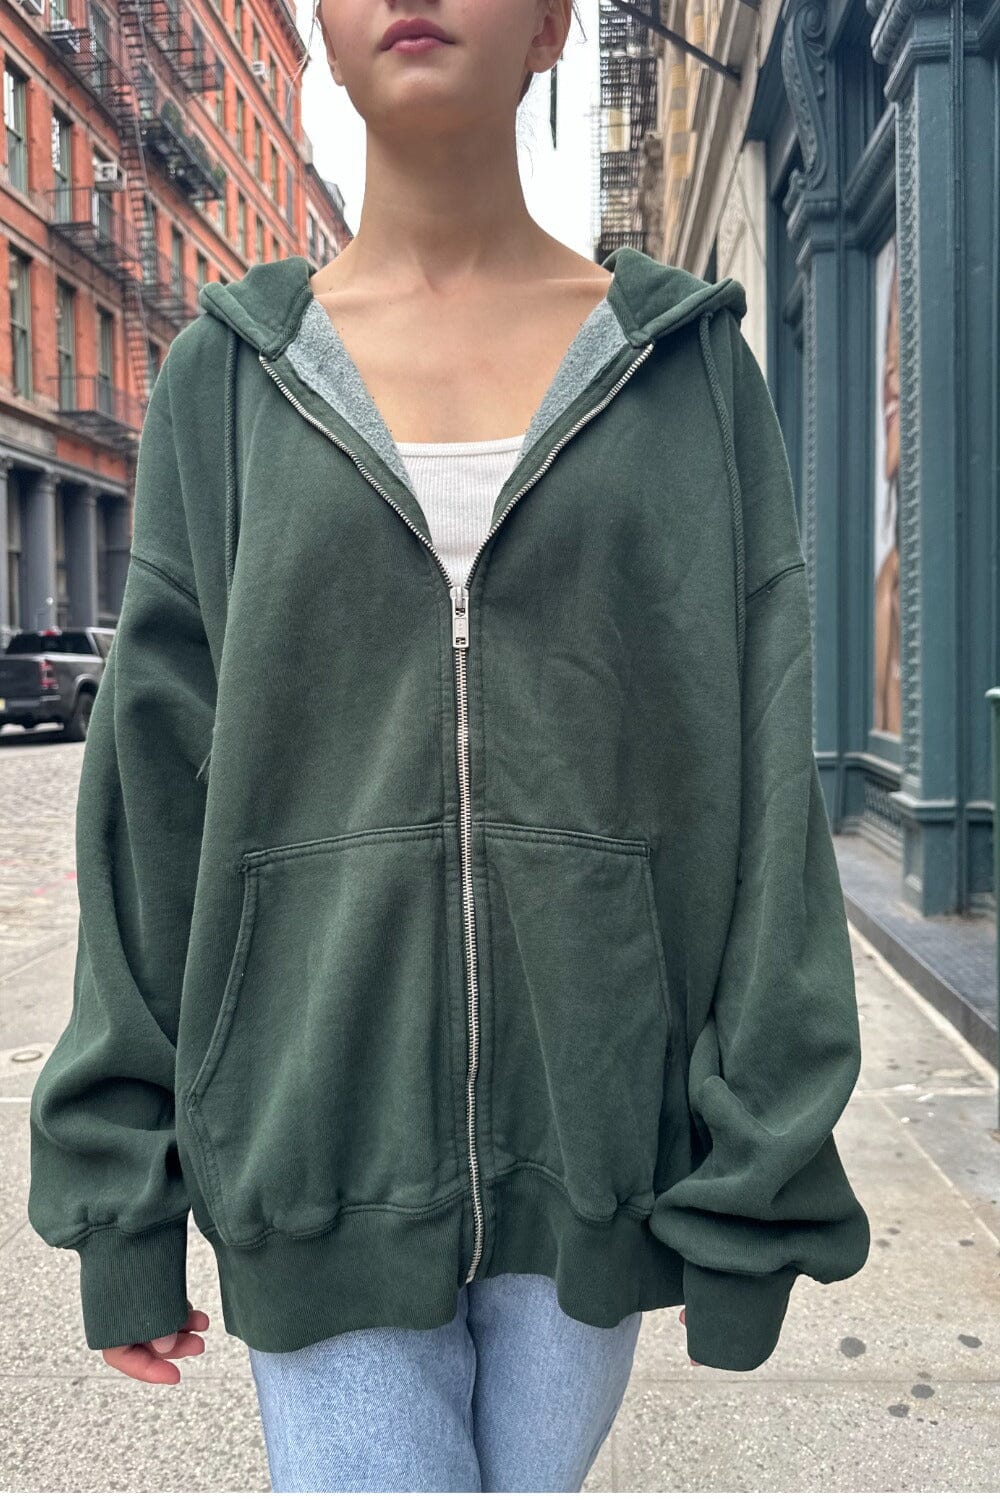 Brandy Melville Graphics Hooded Sweaters